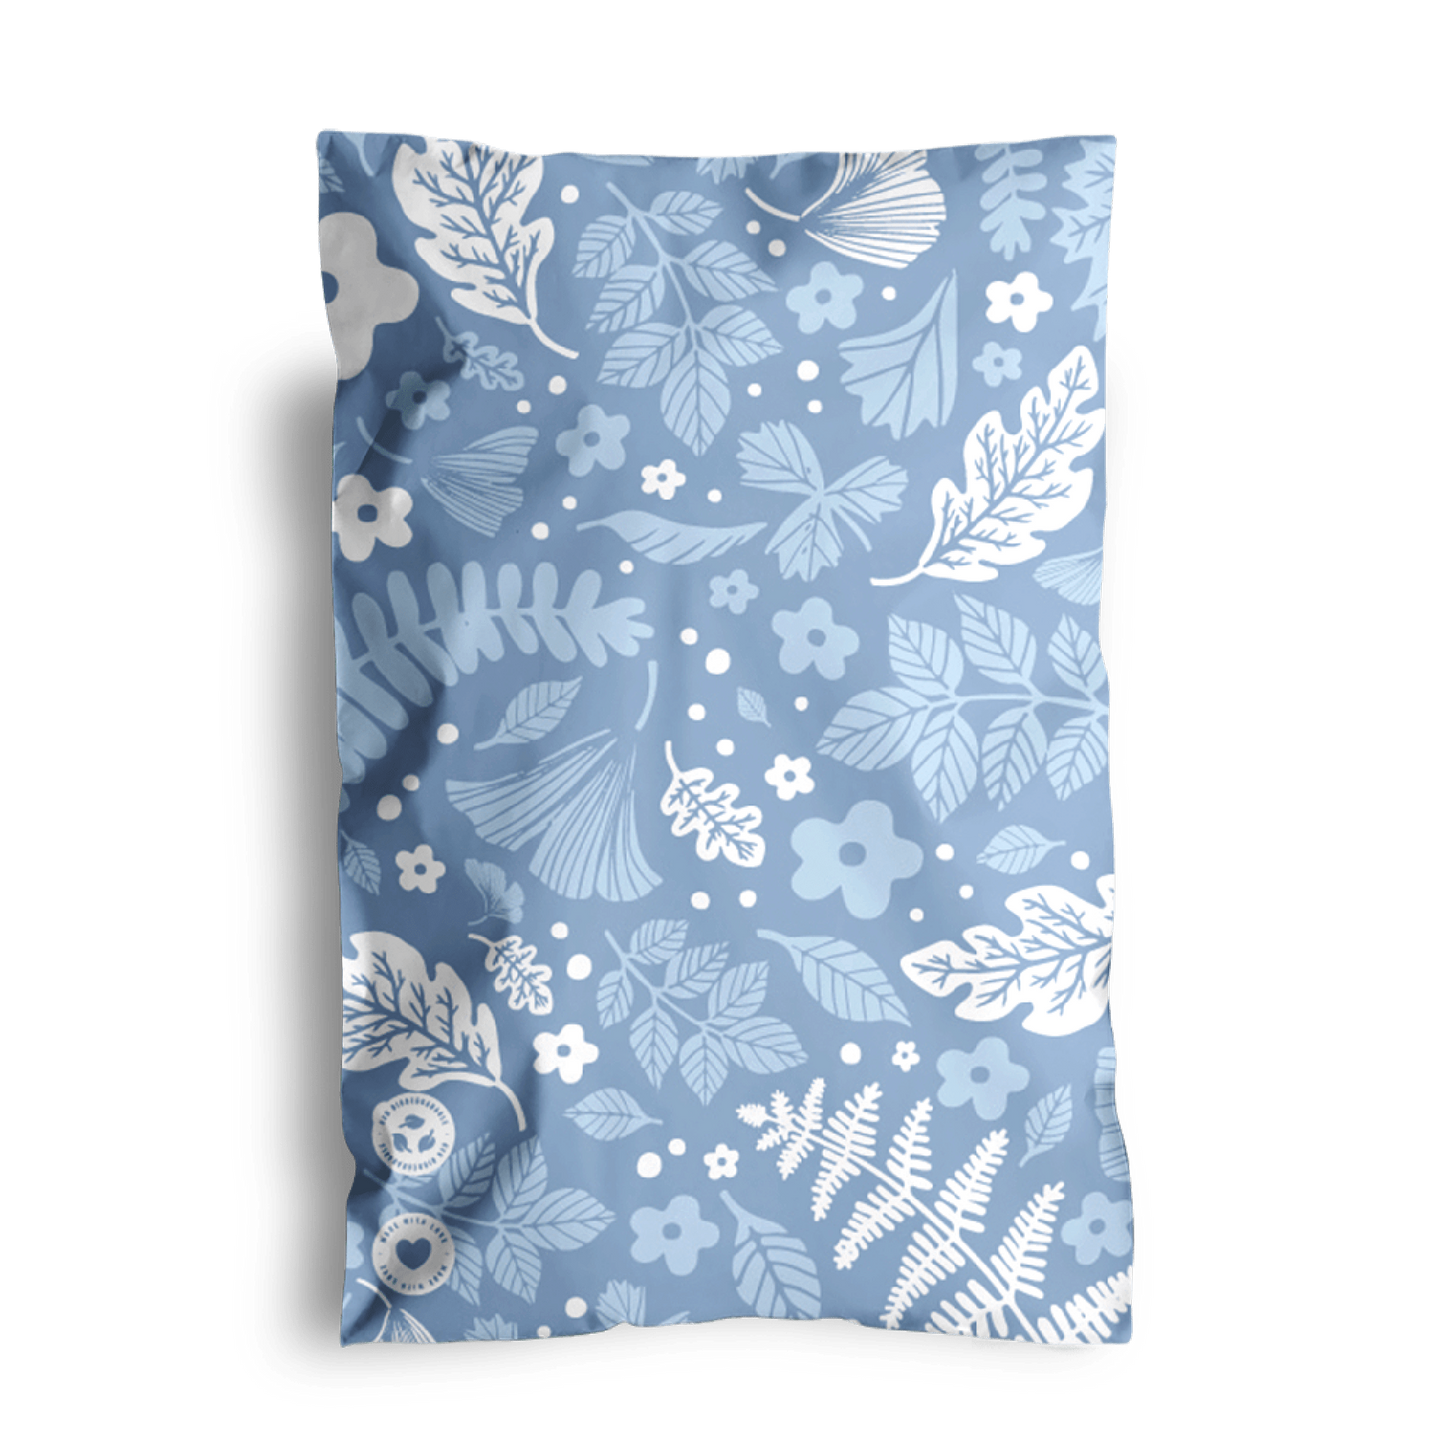 A decorative pillow with a blue floral pattern and two visible buttons, placed against a black background in Sapphire Evergreen Biodegradable Mailers 6" x 9" from impack.co.